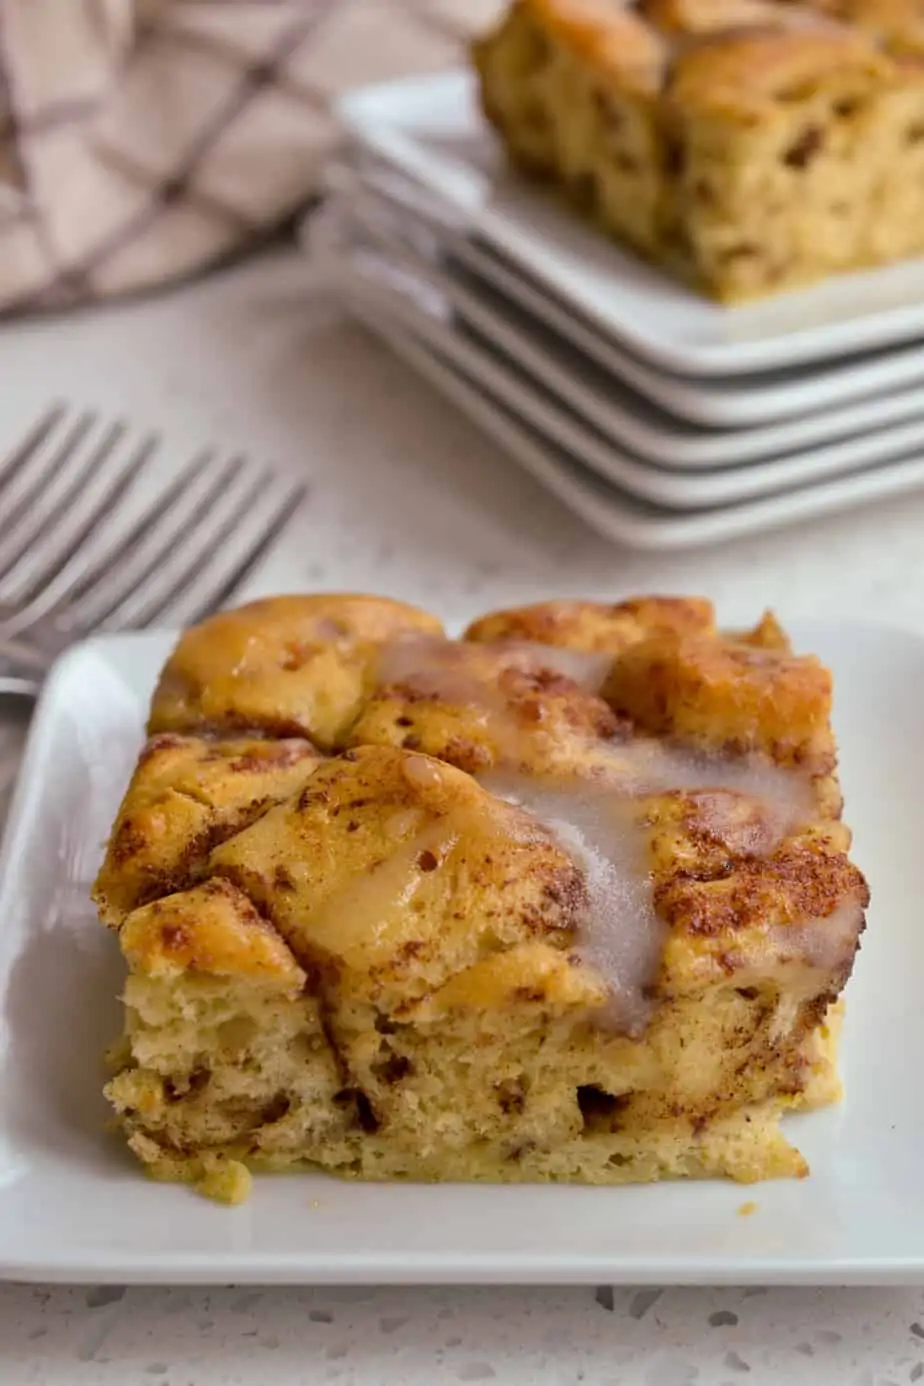 Refrigerated Cinnamon Rolls are combined with eggs and spices and baked. 